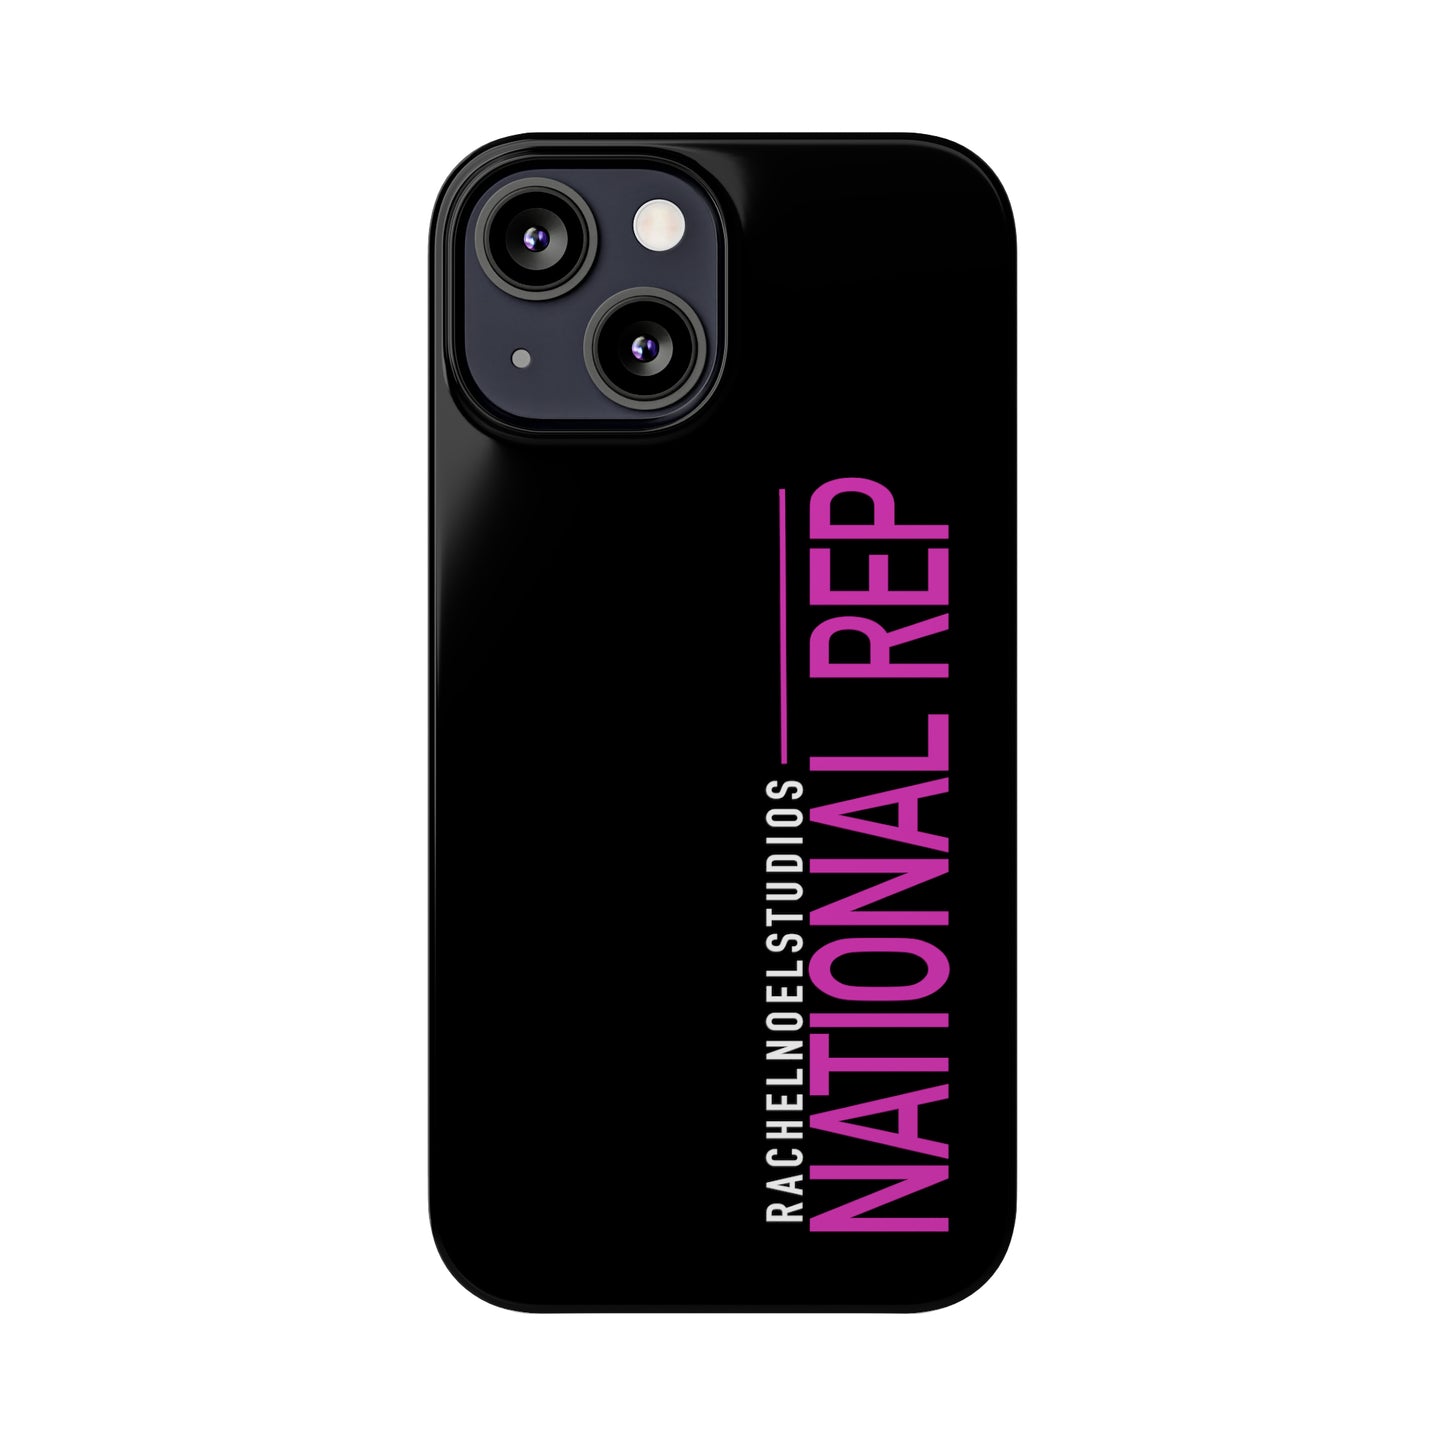 “National Rep” RNS Phone Cases